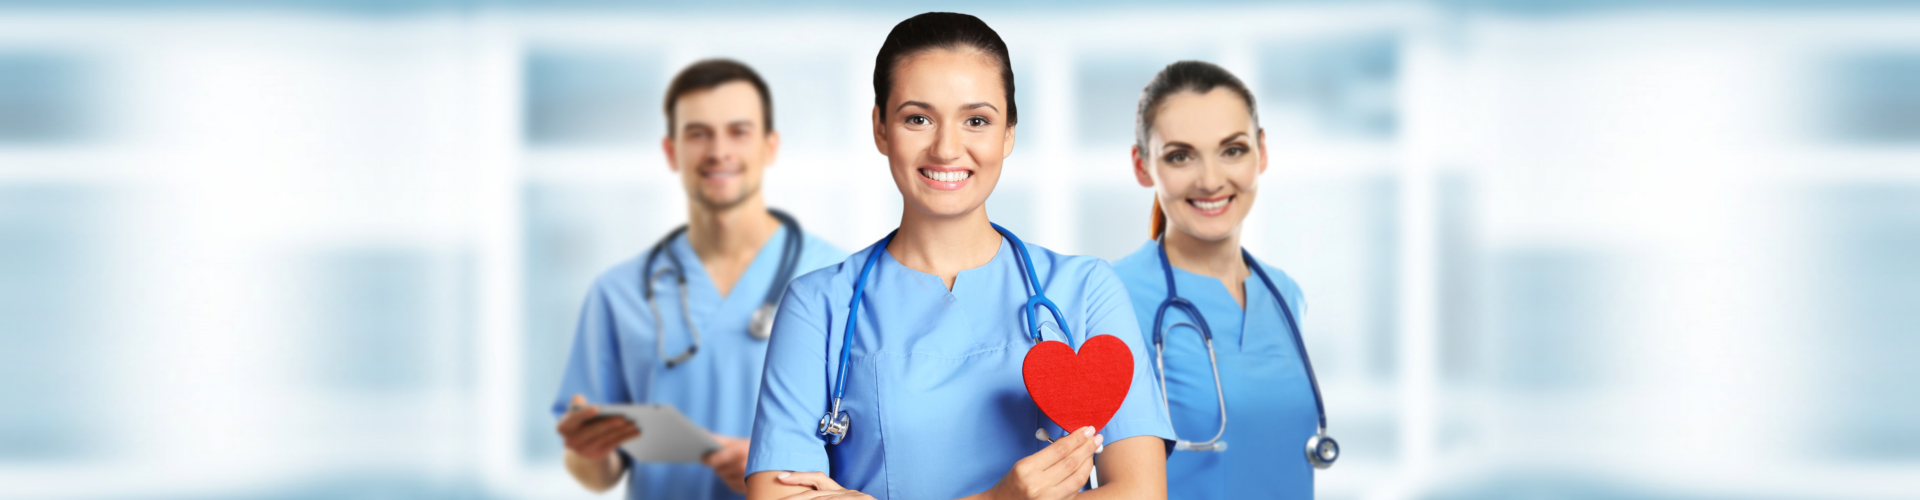 Young female doctor with red heart and medical team on blurred background